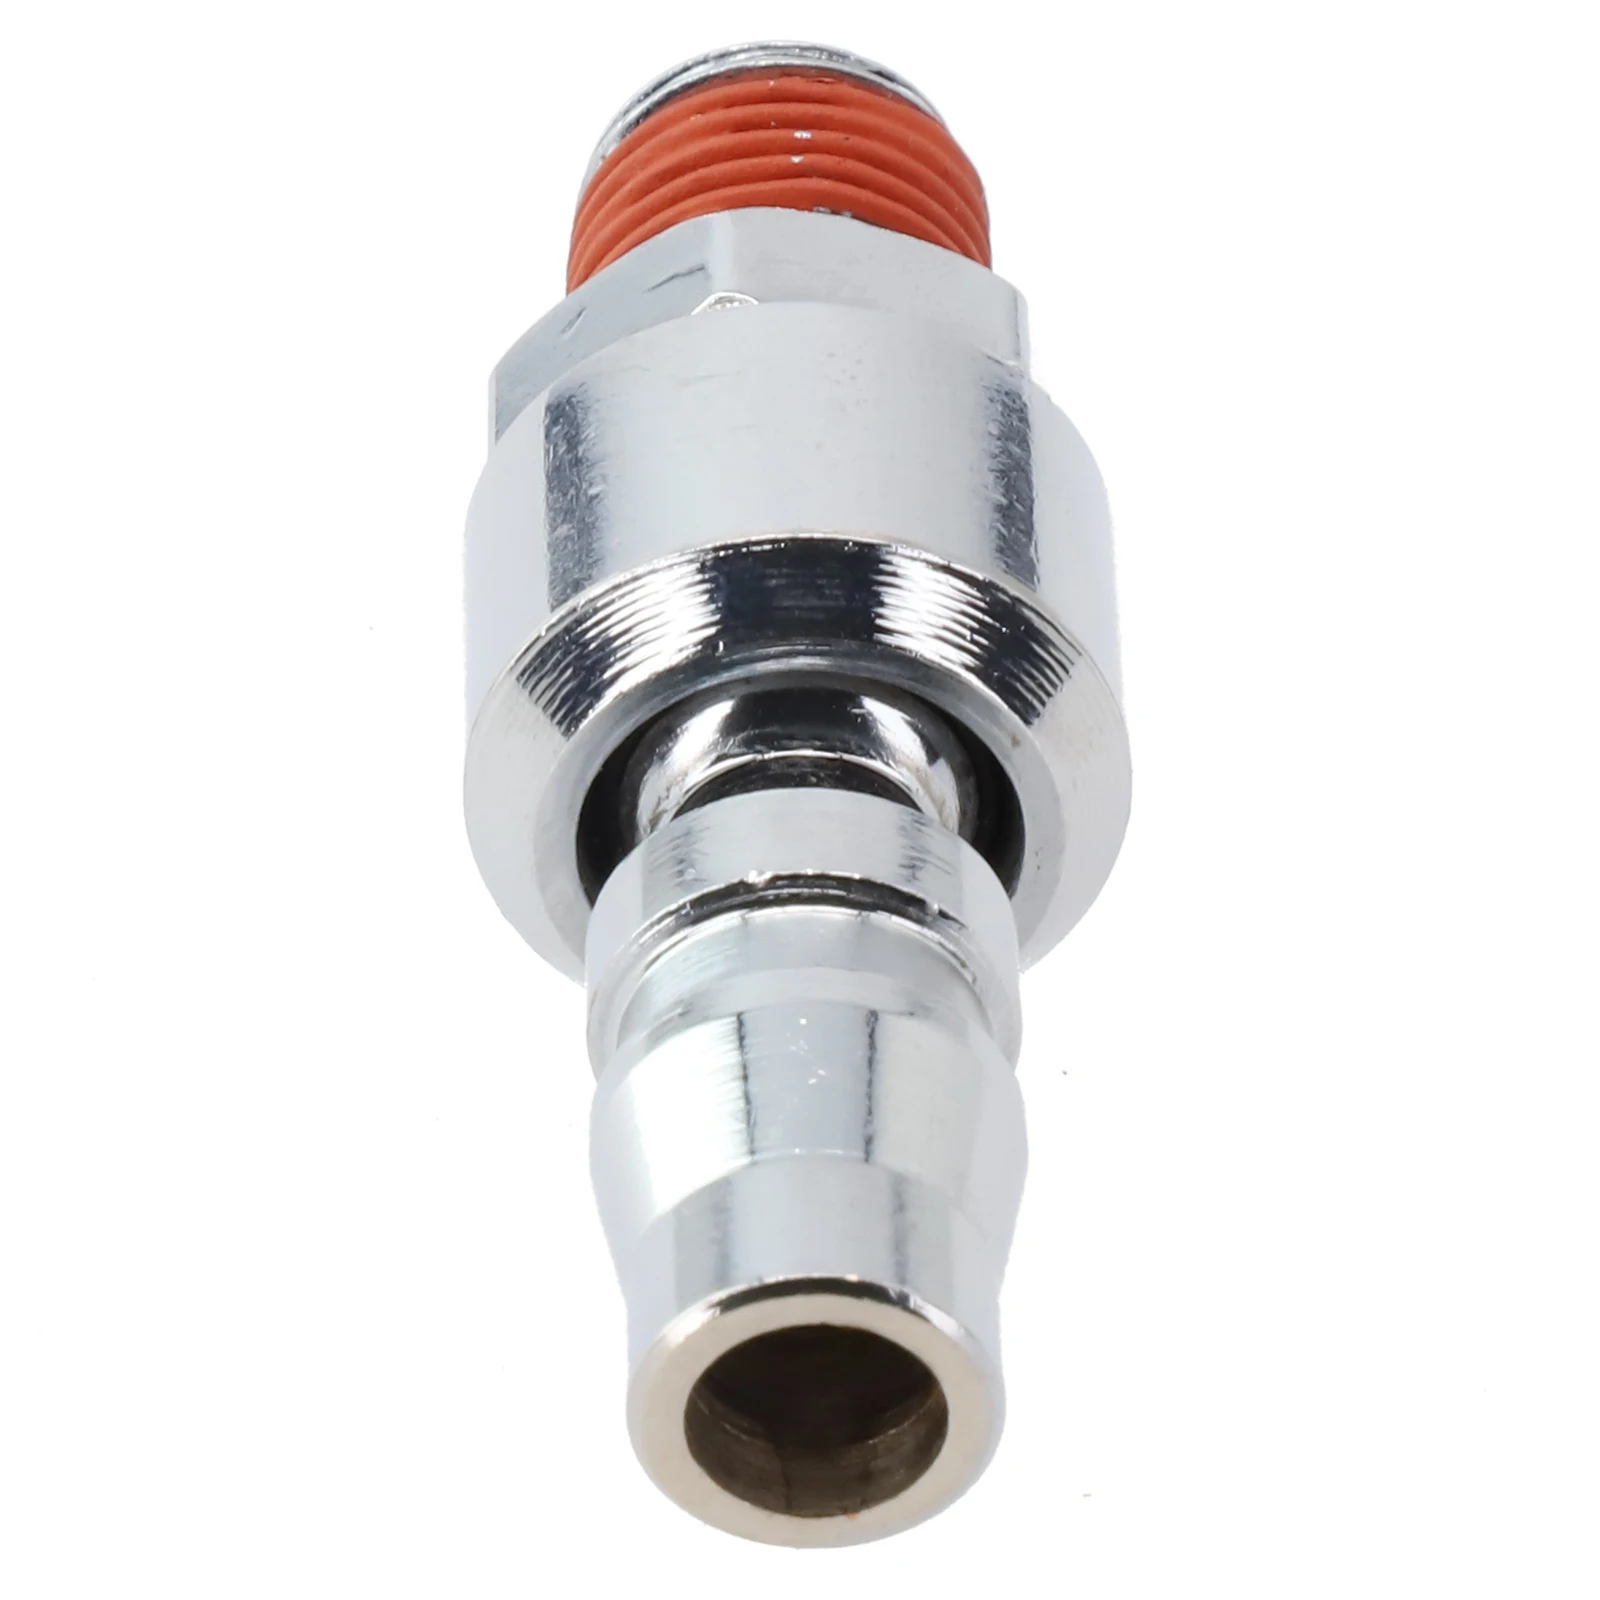 

For Air Compressor 1/4 Inch Quick Joint Connector Adapter(Japanese) 20PM 360 Degree Rotary Universal For Pneumatic Tool Parts